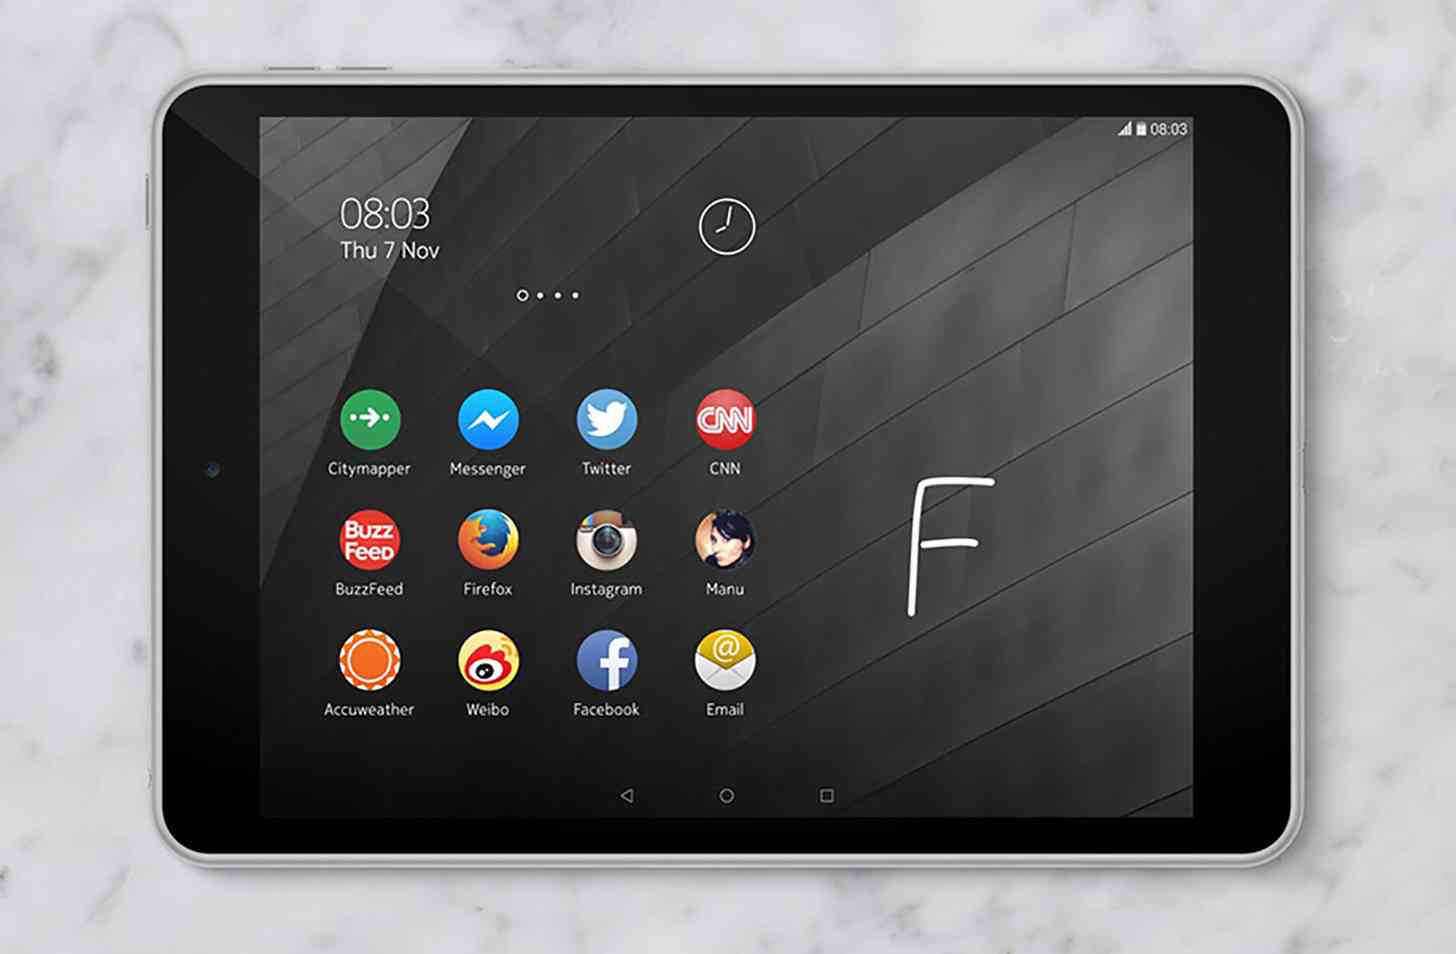 Nokia N1 Android tablet official